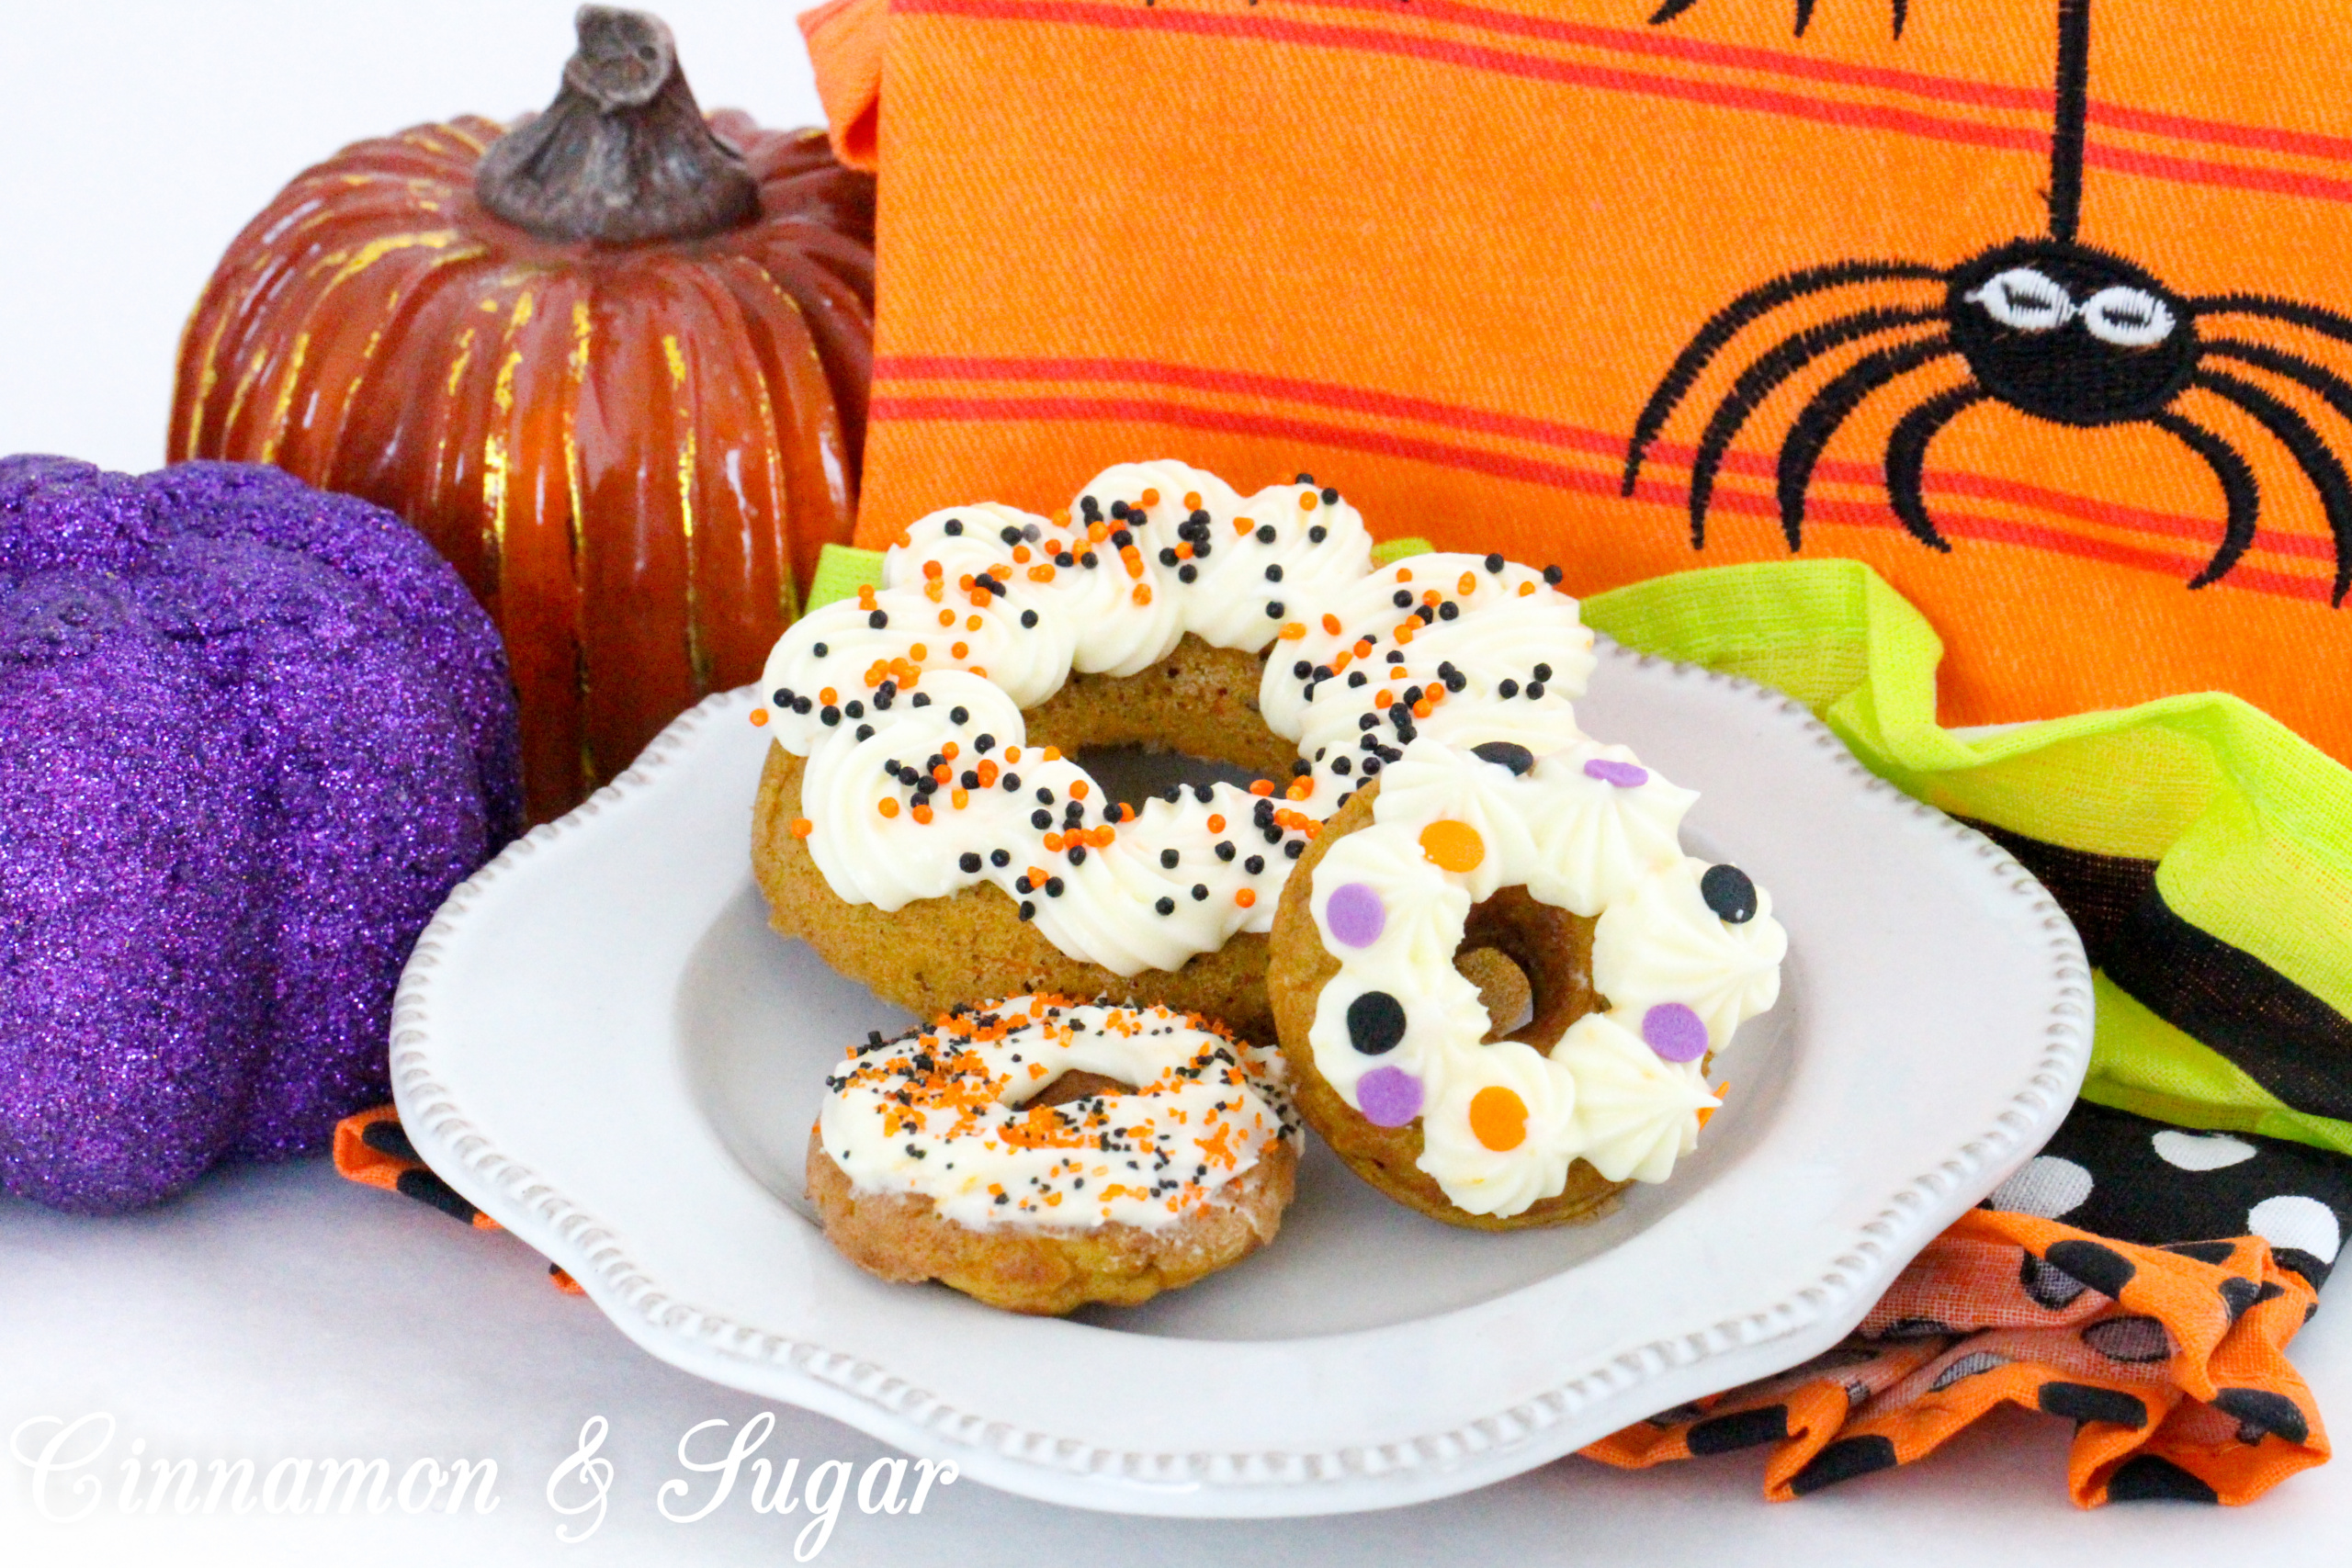 Scare-It Cake Donuts are a riff on Carrot Cake! Filled with warm, autumn spices and a generous portion of grated carrots to keep them extra moist, these donuts are a treat for all gouls and goblins! Recipe shared with permission granted by Ginger Bolton, author of BOSTON SCREAM MURDER. 